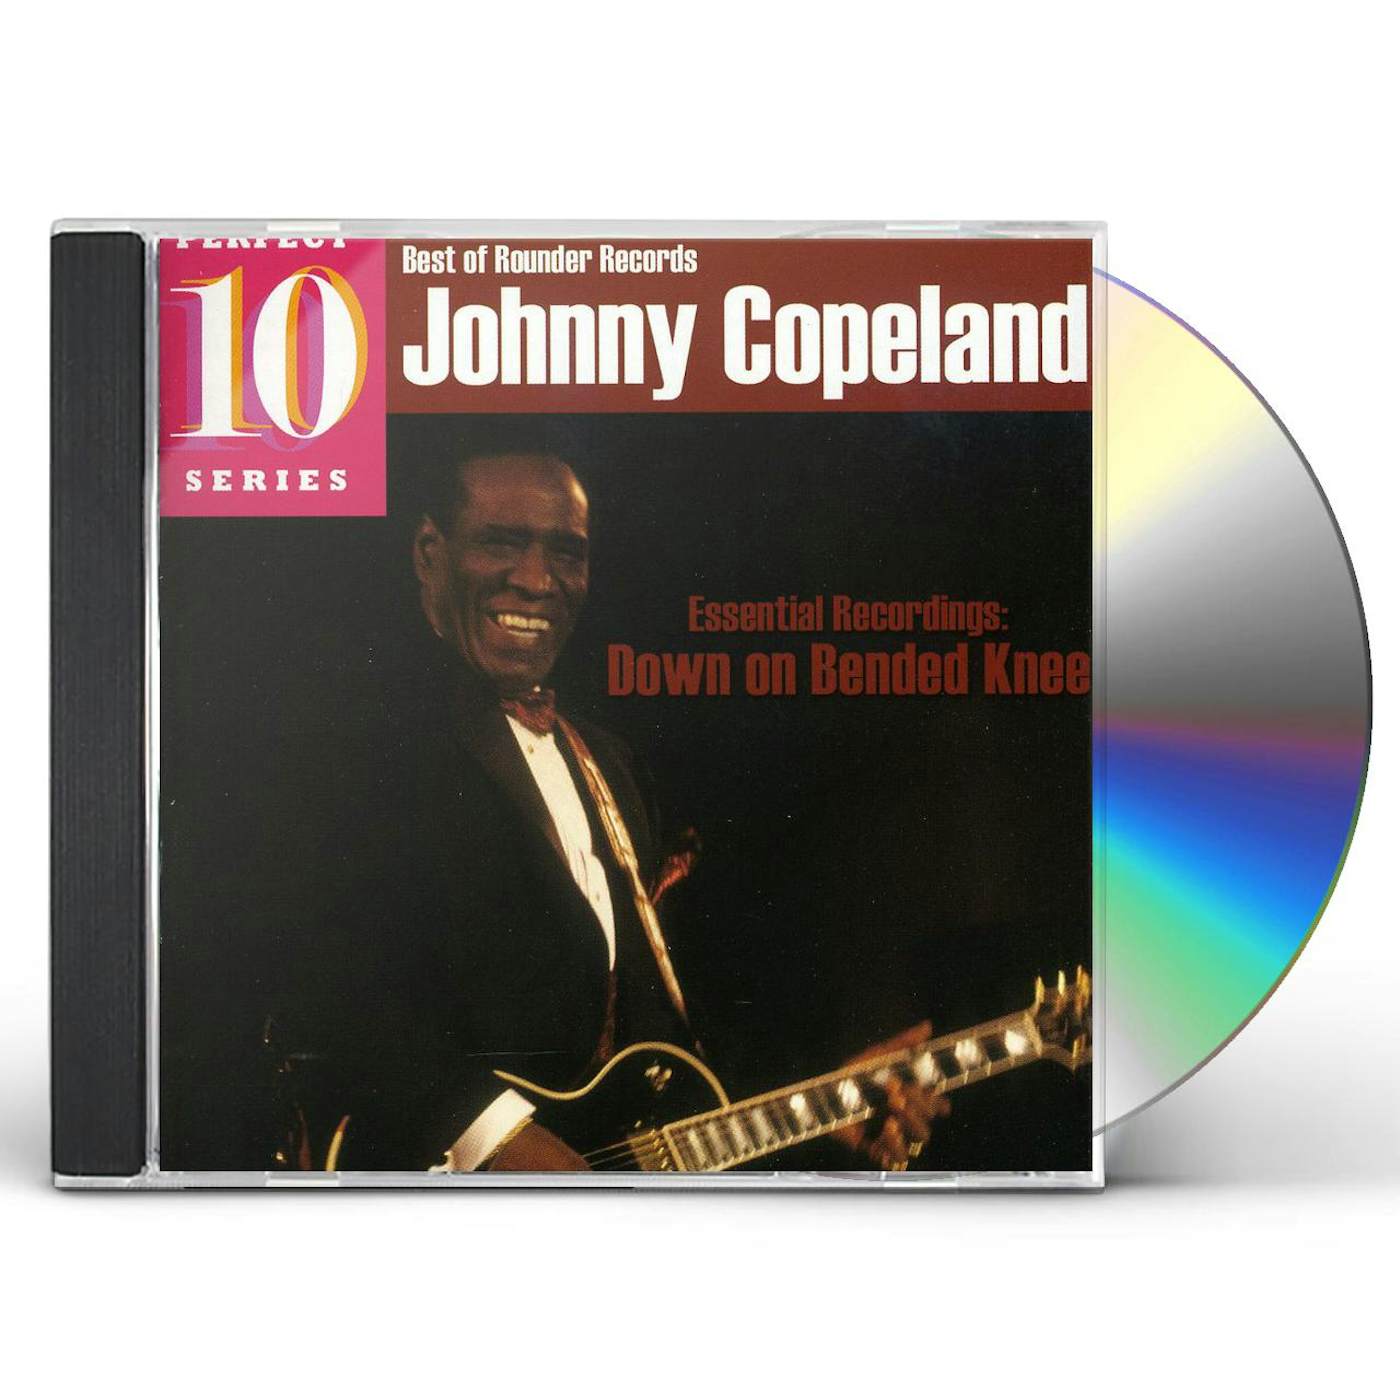 Johnny Copeland ESSENTIAL RECORDINGS: DOWN ON BENDED KNEE CD